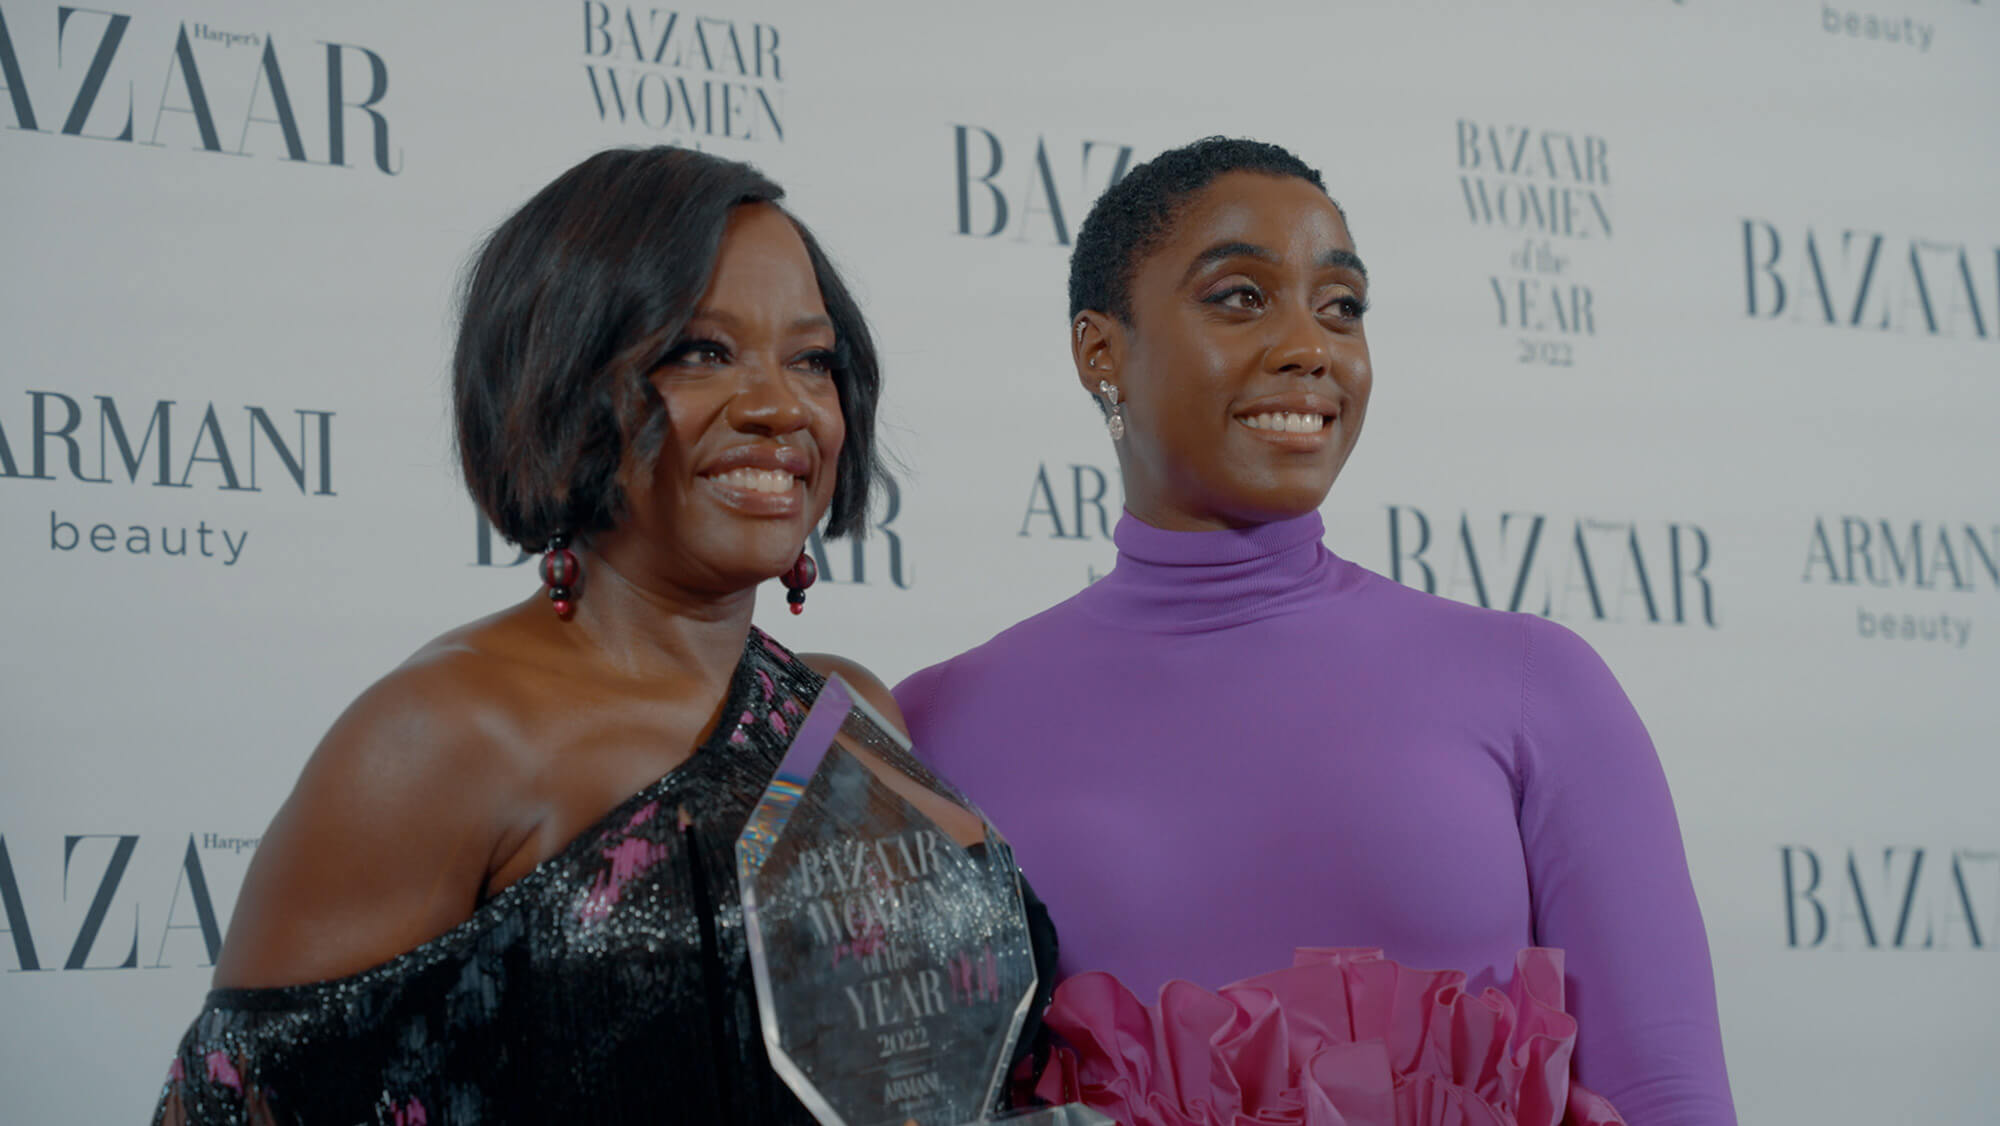 Viola Davis and Lashana Lynch at the Harper's Bazaar Women of the Year Awards 2022 event video, from the Rise Media case studies archive